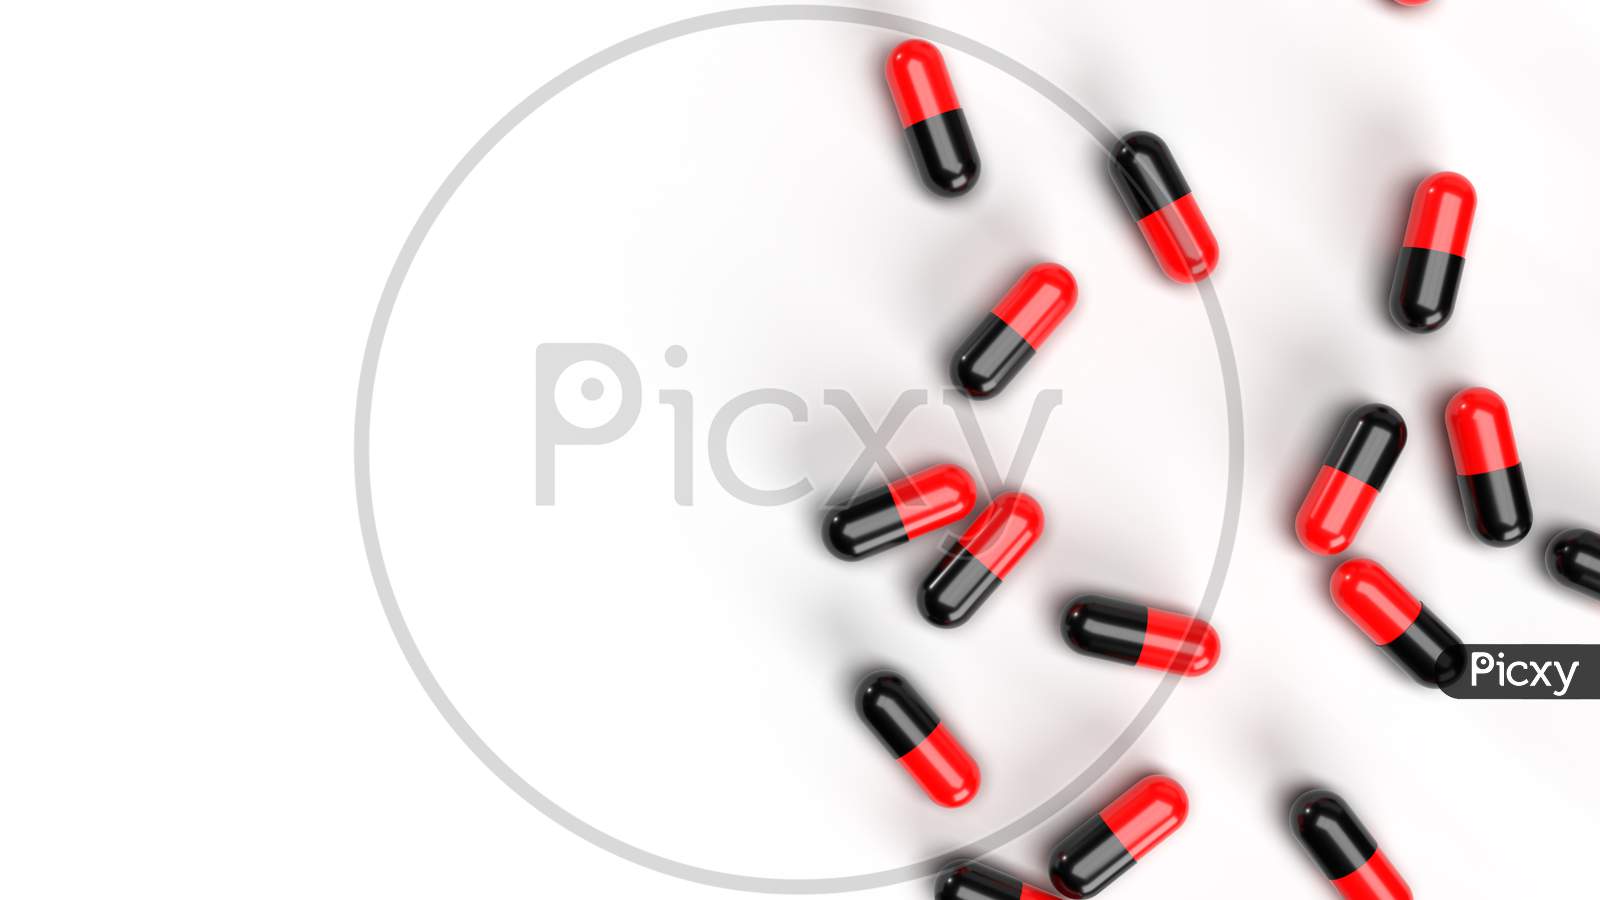 Group Of Pills Medicine On White Background. Medical Research And Pharmacy Concept. Drug Addiction. Health Care And Prescription Treatment. Supple Food And Vitamin. Copy Space. 3D Illustration Render